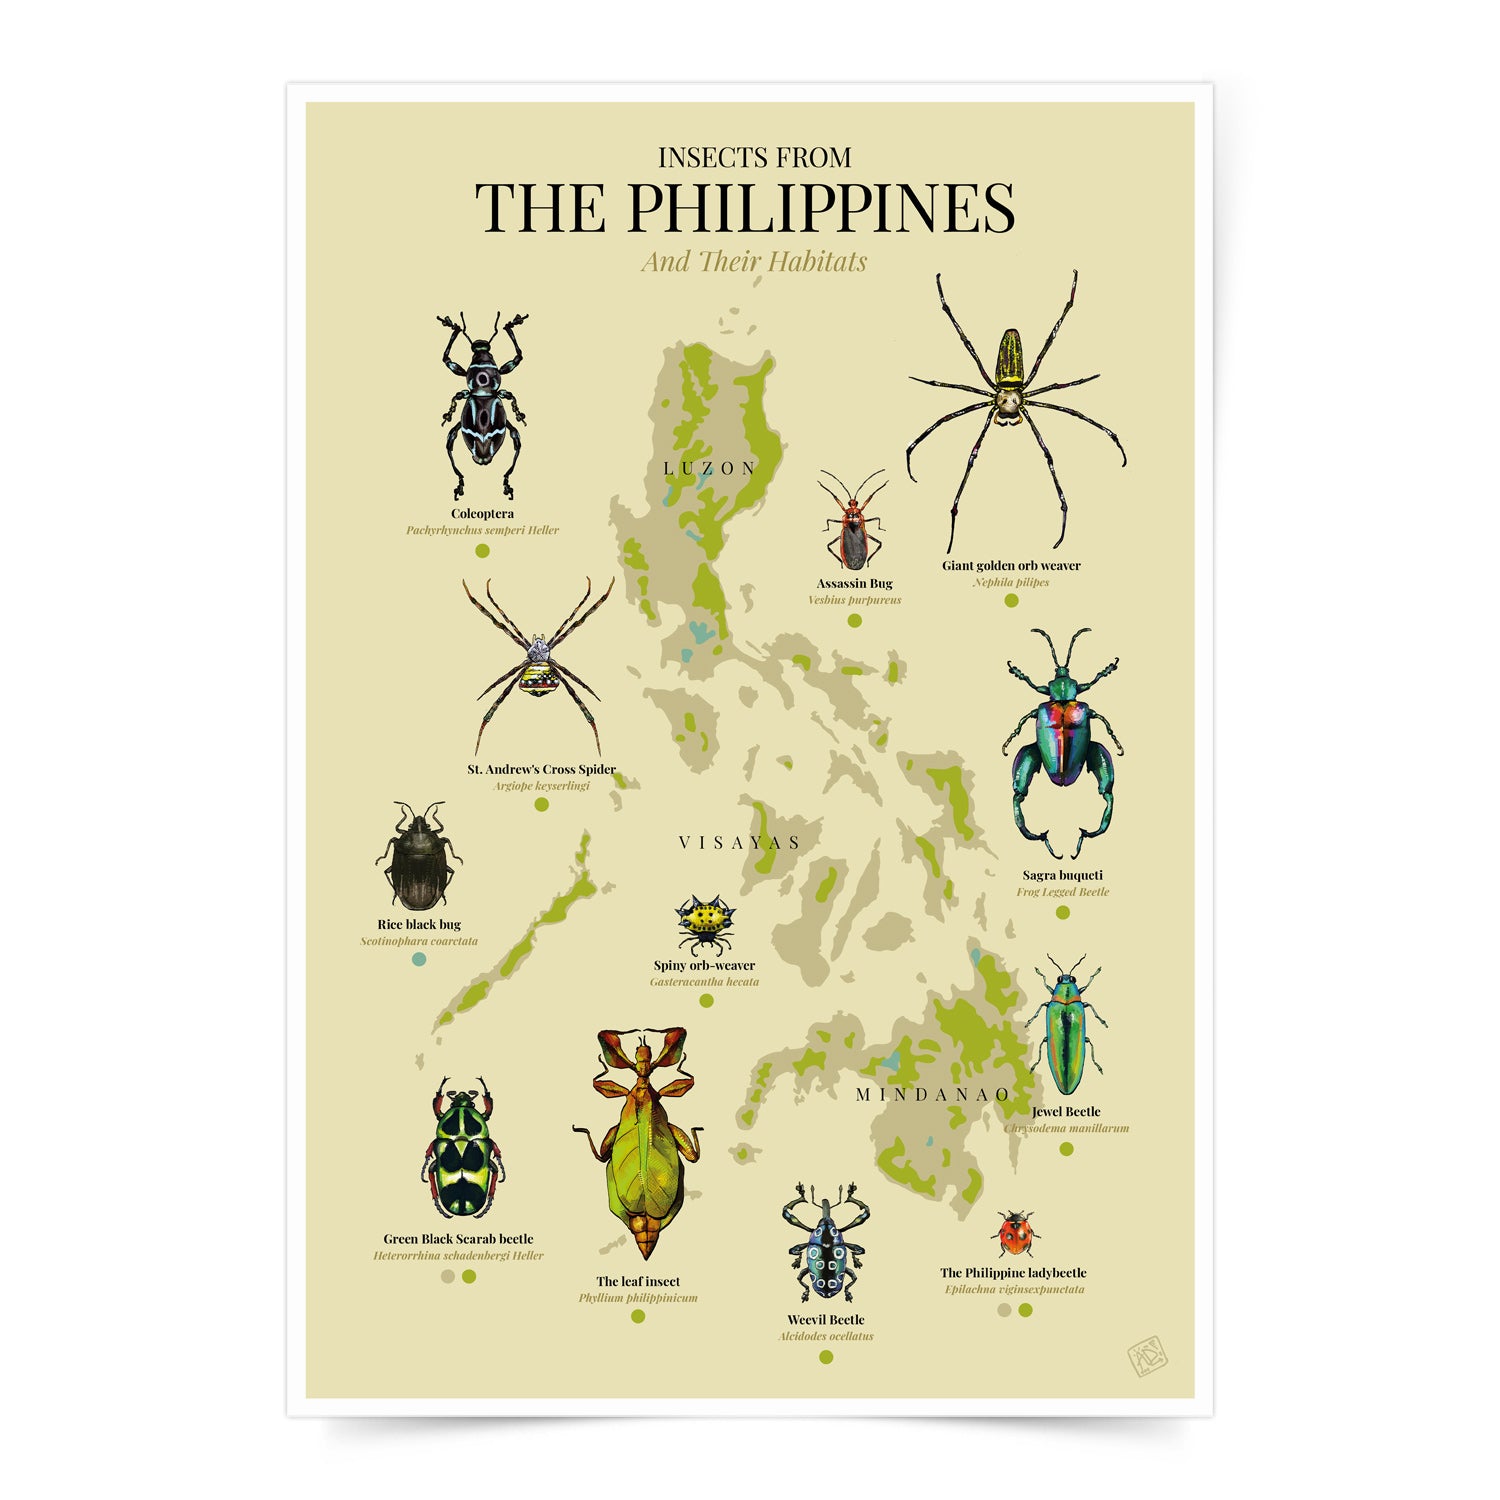 insect bug spider Luzon Visayas Mindanao Islands Map PH Habitat Coleoptera Giant golden orb weaver St. Andrew's Cross Spider Rice black bug Assassin Bug Spiny orb-weaver Sagra buqueti Green Black Scarab beetle The leaf insect Weevil Beetle Jewel Beetle The Philippine ladybeetle The leaf insect Green Black Scarab beetle Home decor decoration print Filipino artist high quality paper